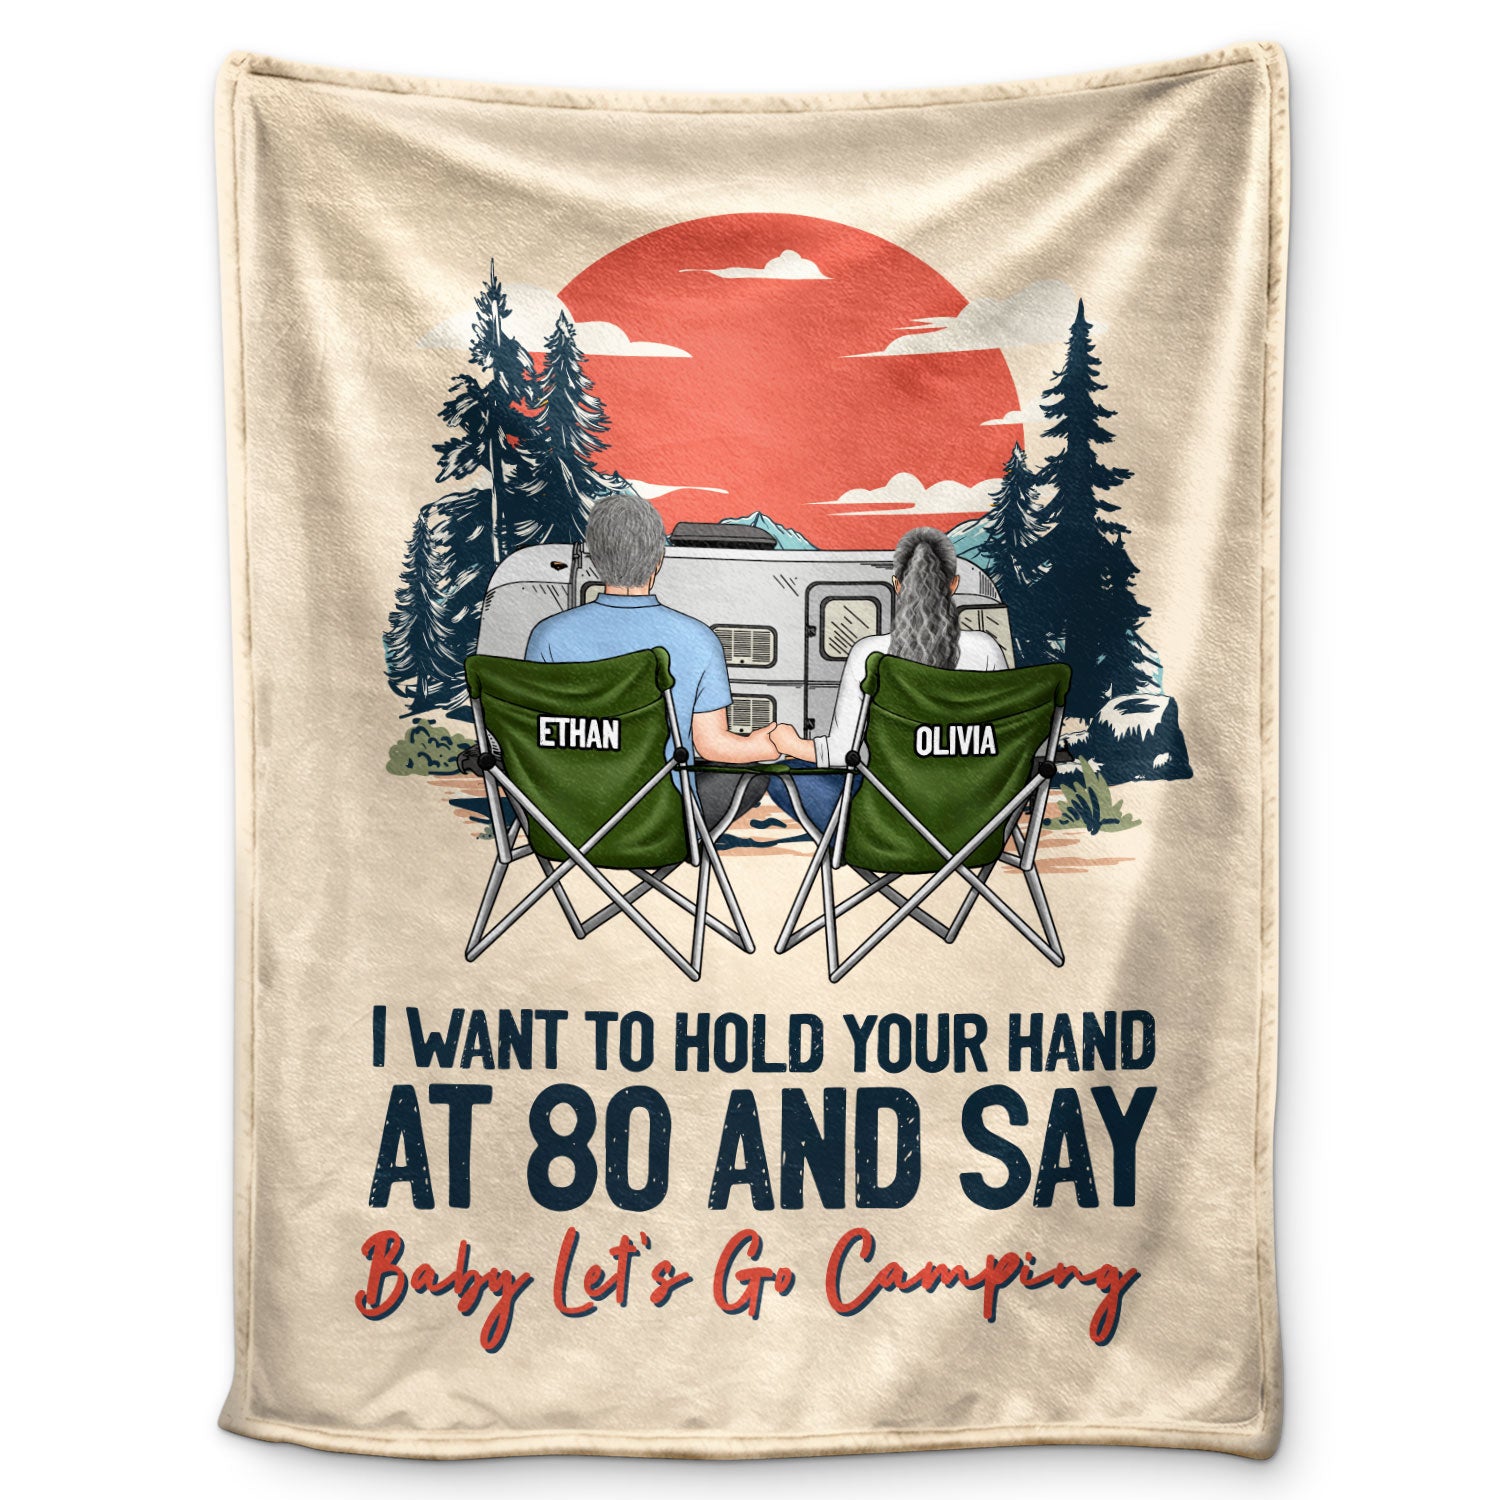 Baby Let's Go Camping - Gift For Couples - Personalized Fleece Blanket